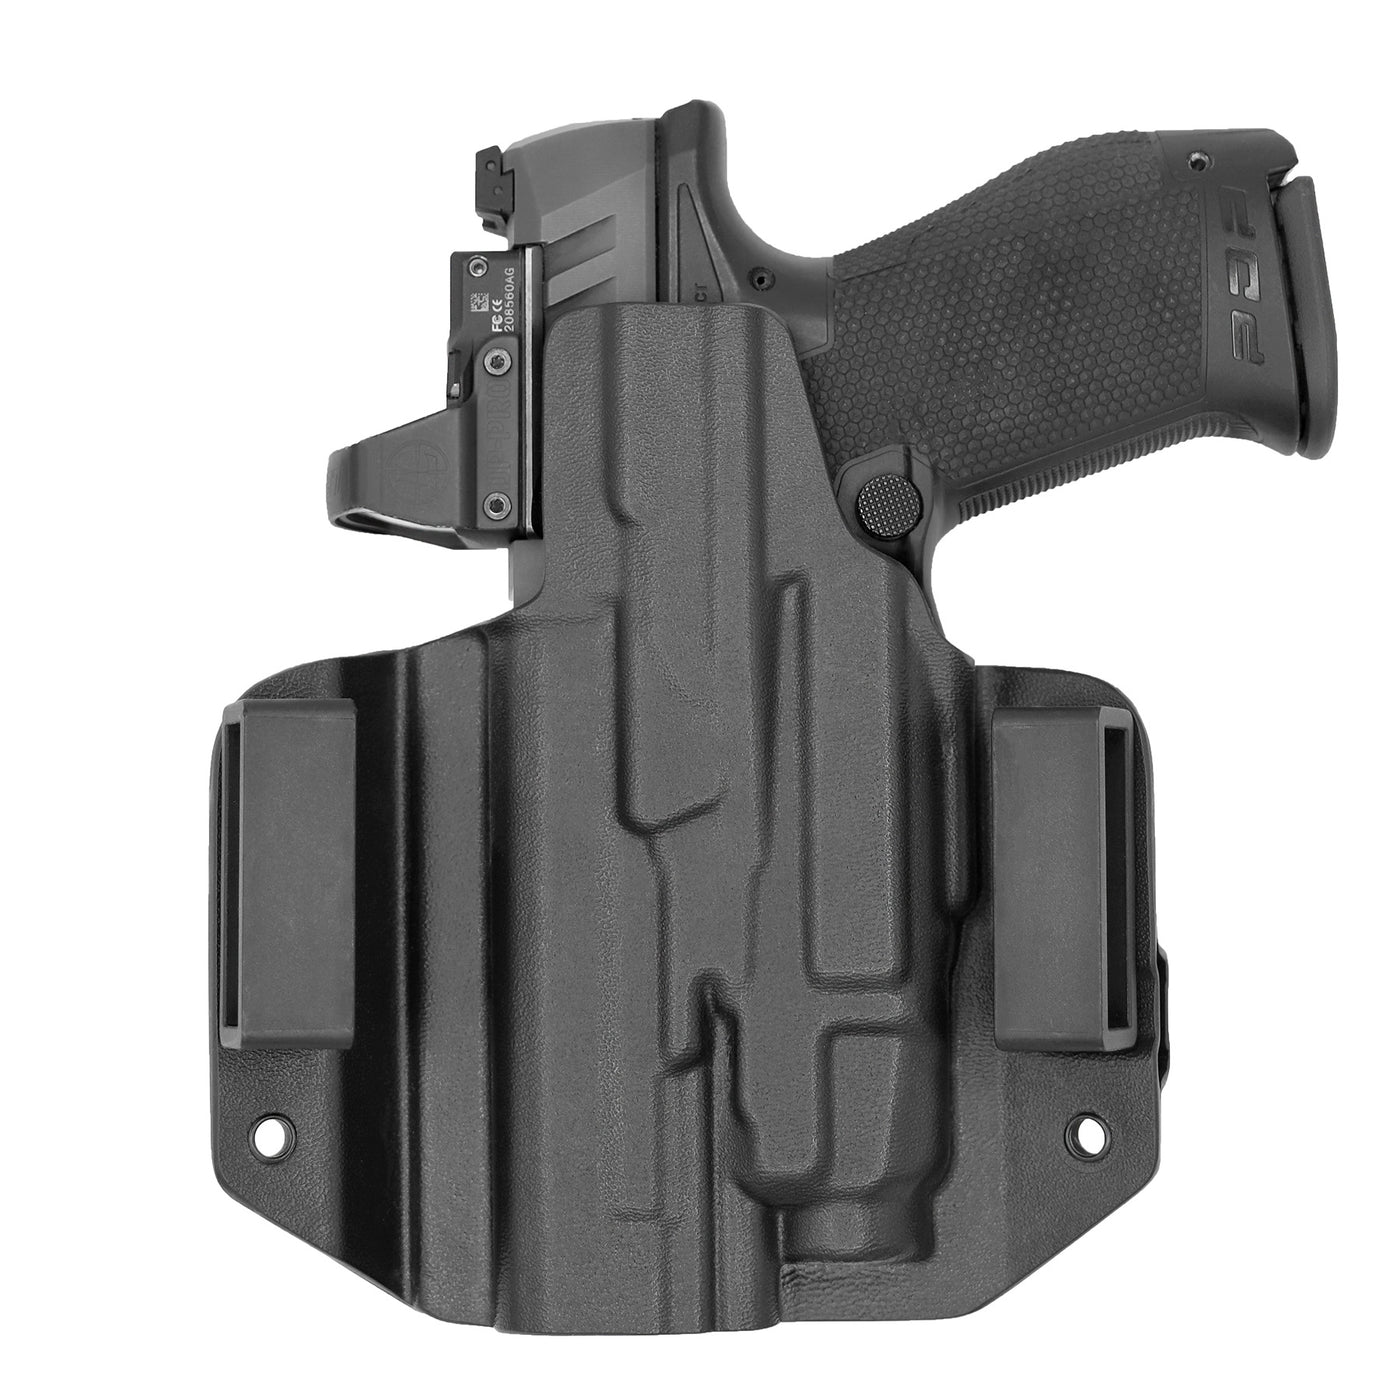 C&G Holsters custom OWB Tactical H&K VP9/sk streamlight tlr7/a in holstered position  back view